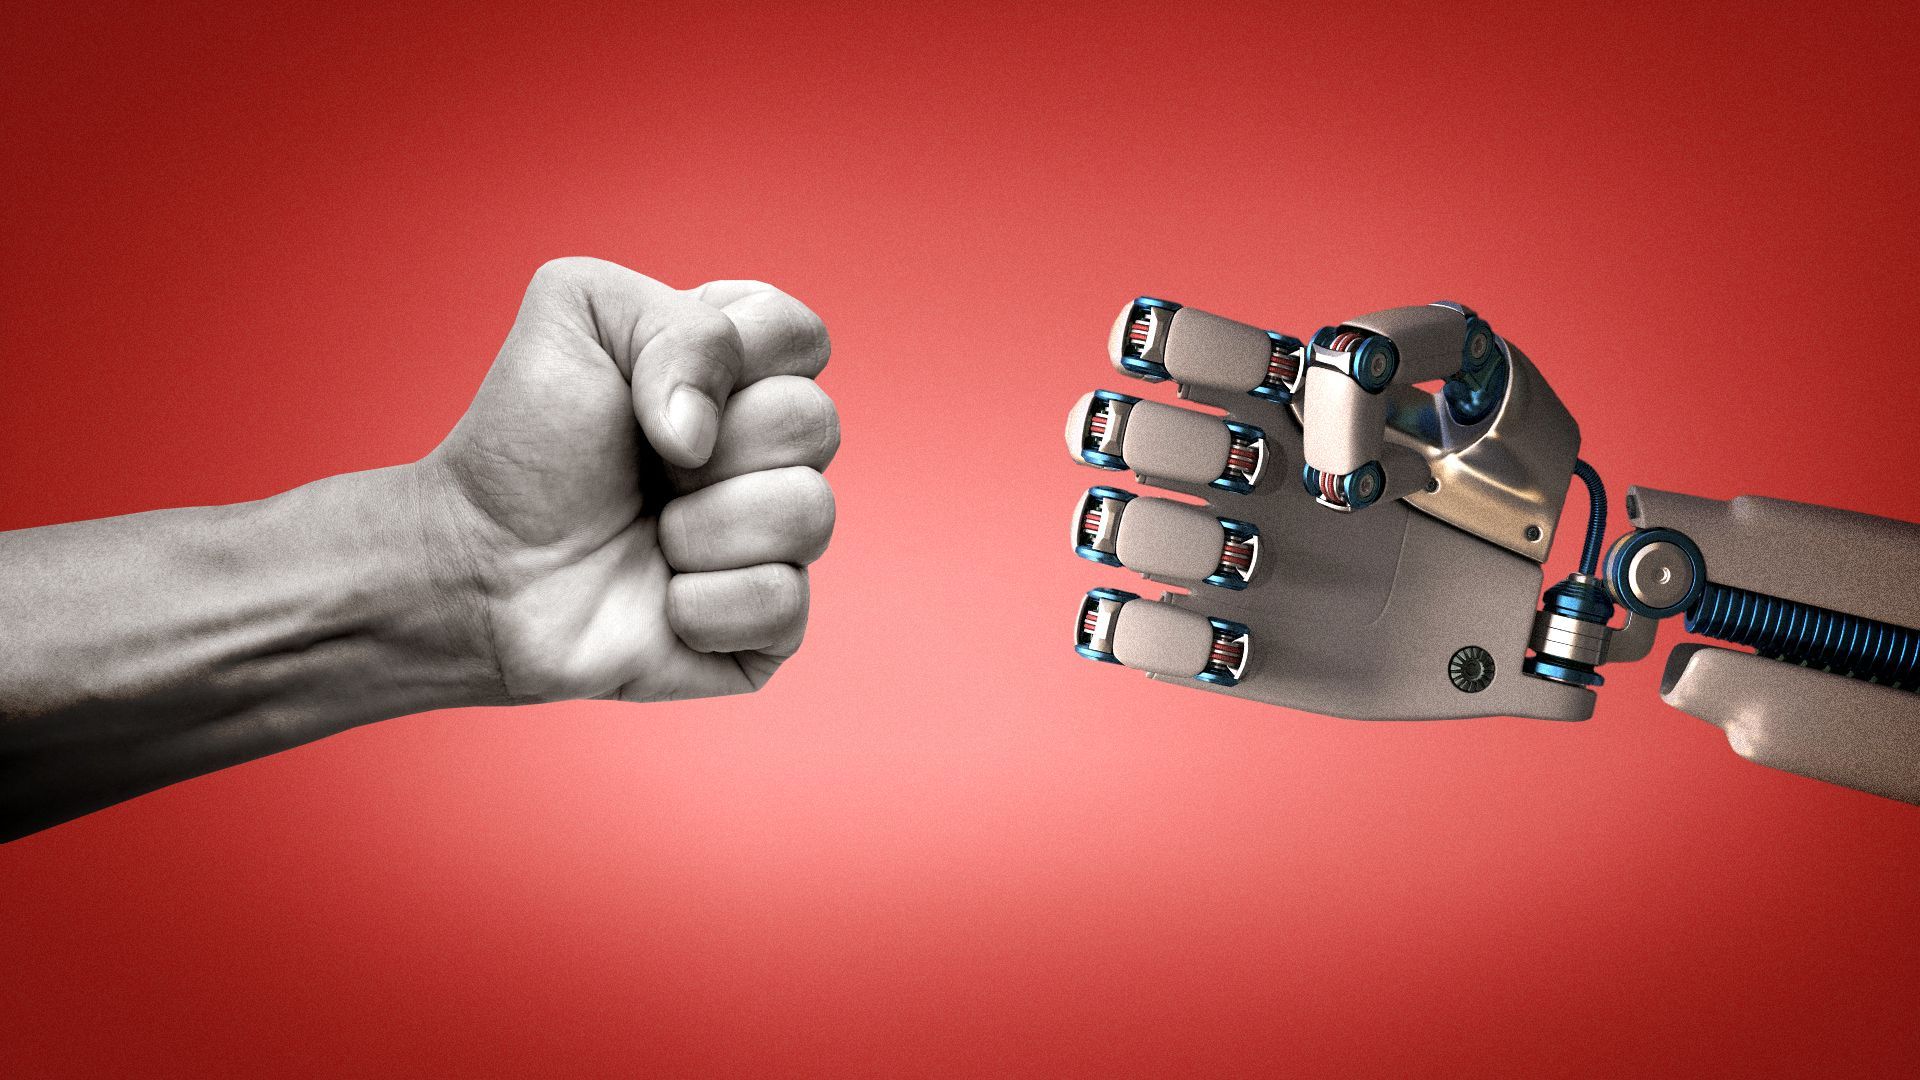 Illustration of a human fist and robot fist facing each other. 